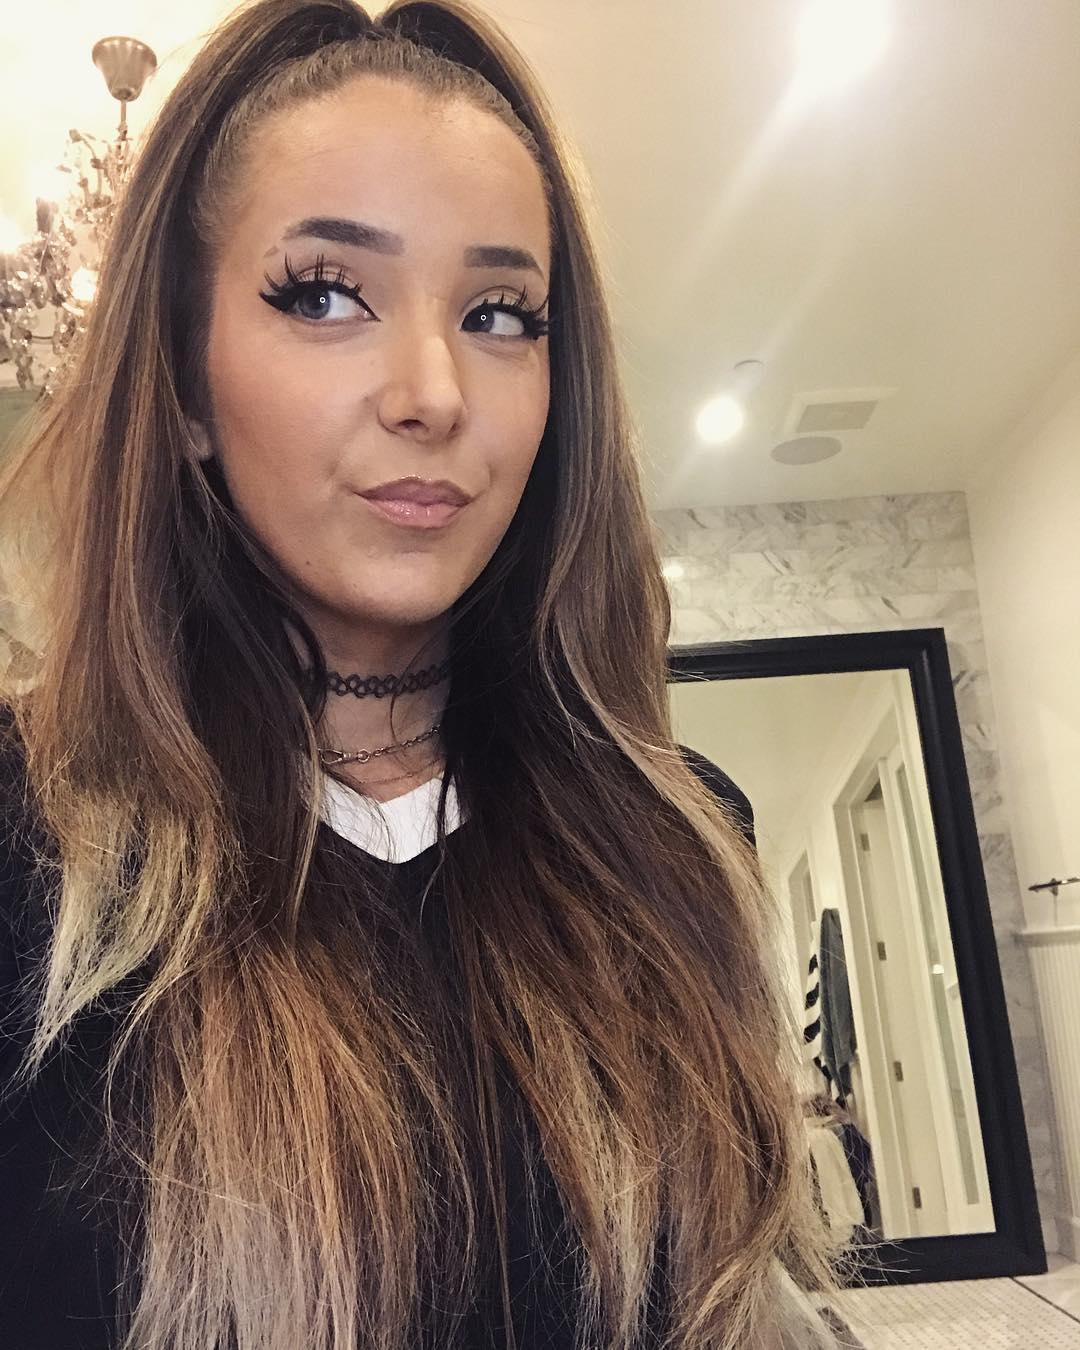 70+ Hot Pictures Of Jenna Marbles Prove She Is The Hottest Youtuber 27